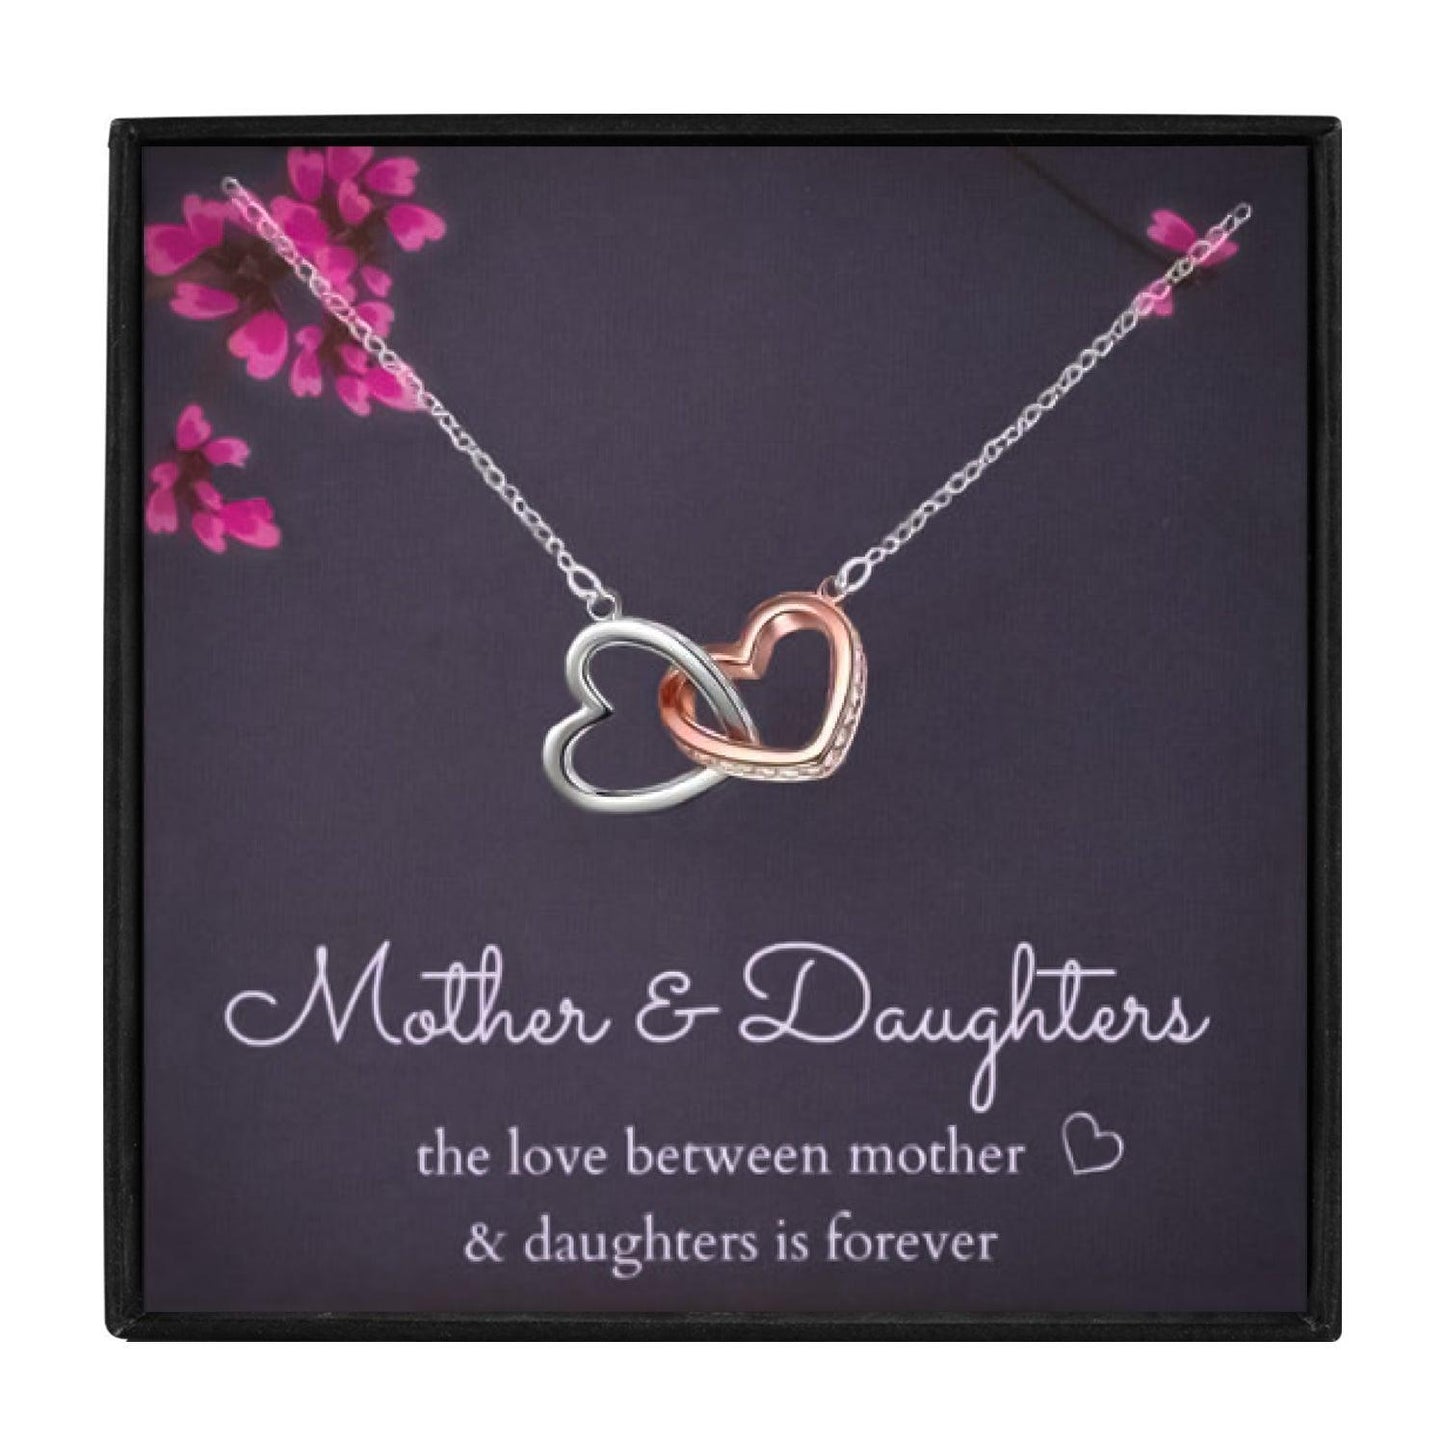 Mother Daughter Heart Necklace Gift Set for Christmas 2023 | Mother Daughter Heart Necklace Gift Set - undefined | mom & daughter, Mom Gift Necklace, mother and daughter necklace | From Hunny Life | hunnylife.com